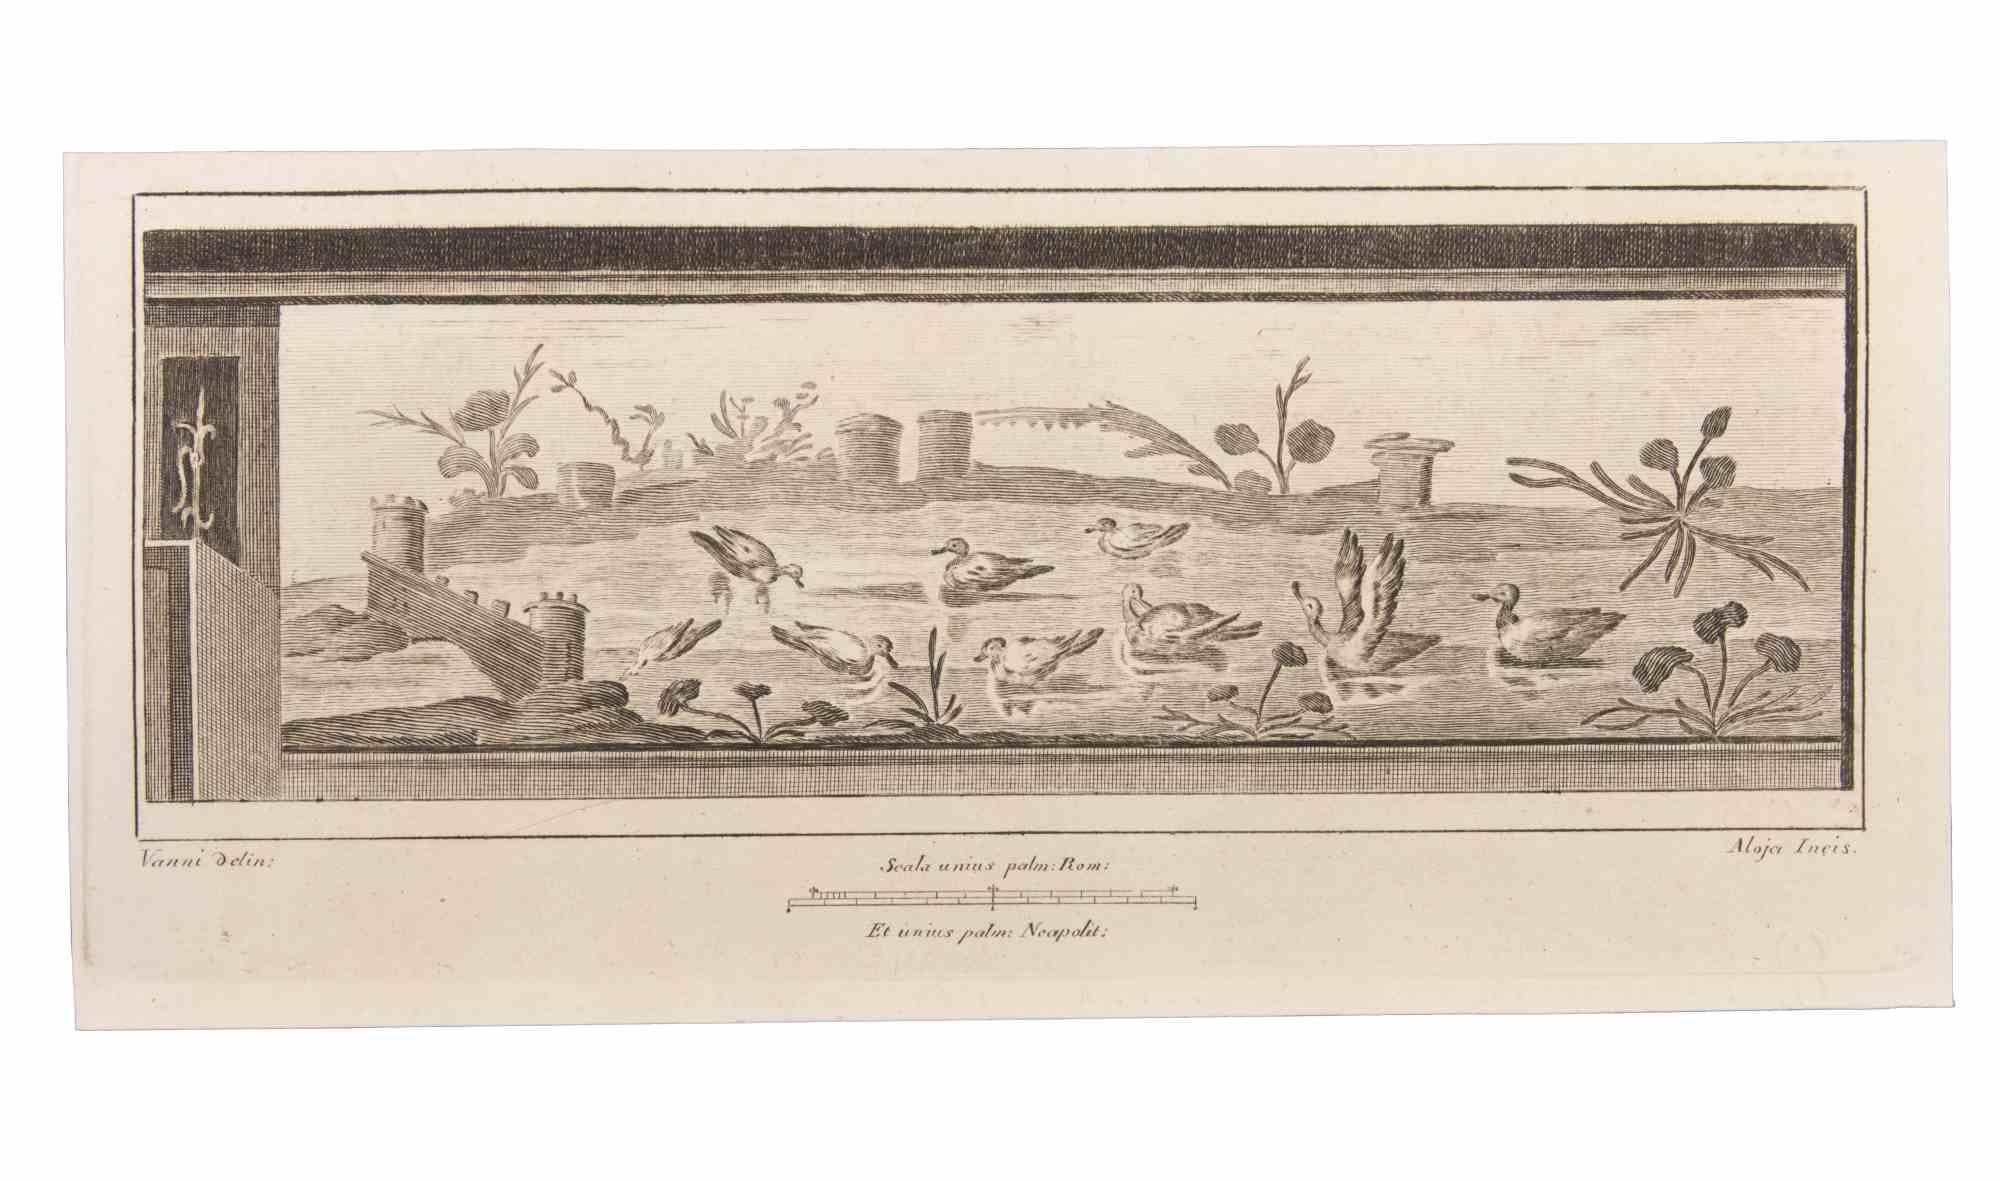 Landscape With Animals is an Etching realized by  Luigi Aloja (1783-1837).

The etching belongs to the print suite “Antiquities of Herculaneum Exposed” (original title: “Le Antichità di Ercolano Esposte”), an eight-volume volume of engravings of the